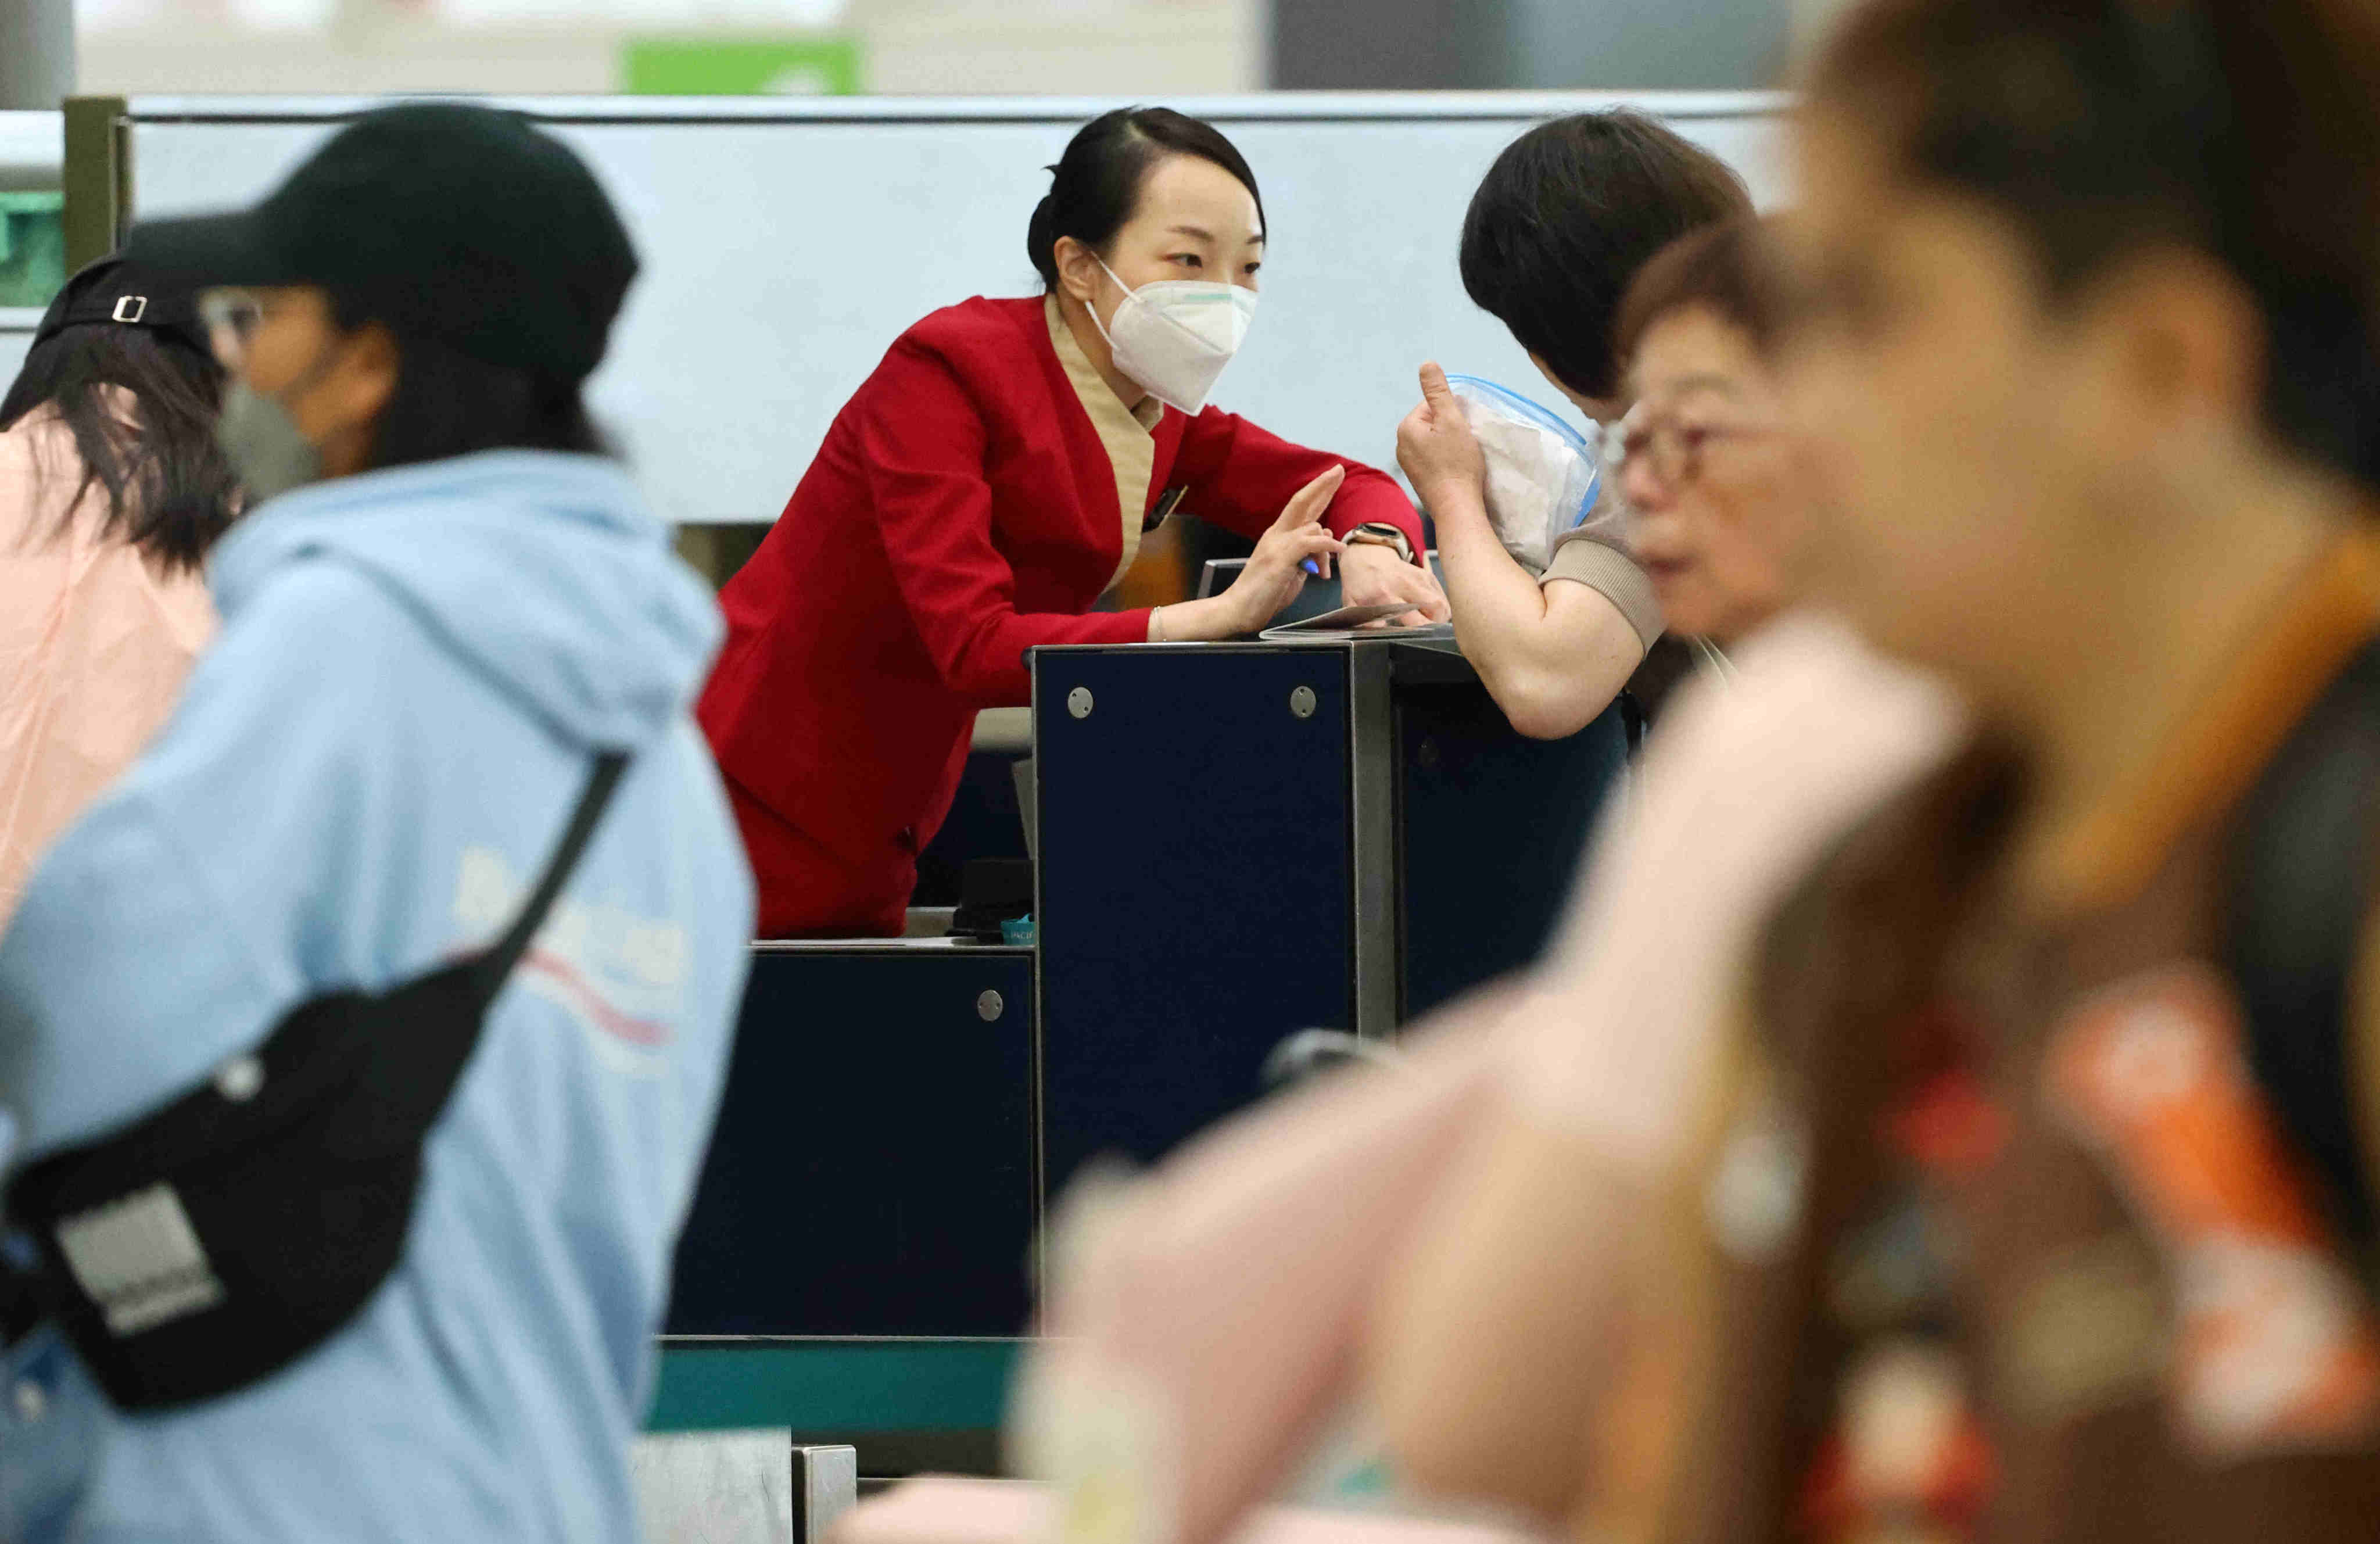 A Cathay Pacific service counter at Hong Kong International Airport on May 8. Cathay should have focused on supporting the very people who are helping the airline recover lost ground – its passengers and frontline workers. Photo: Dickson Lee